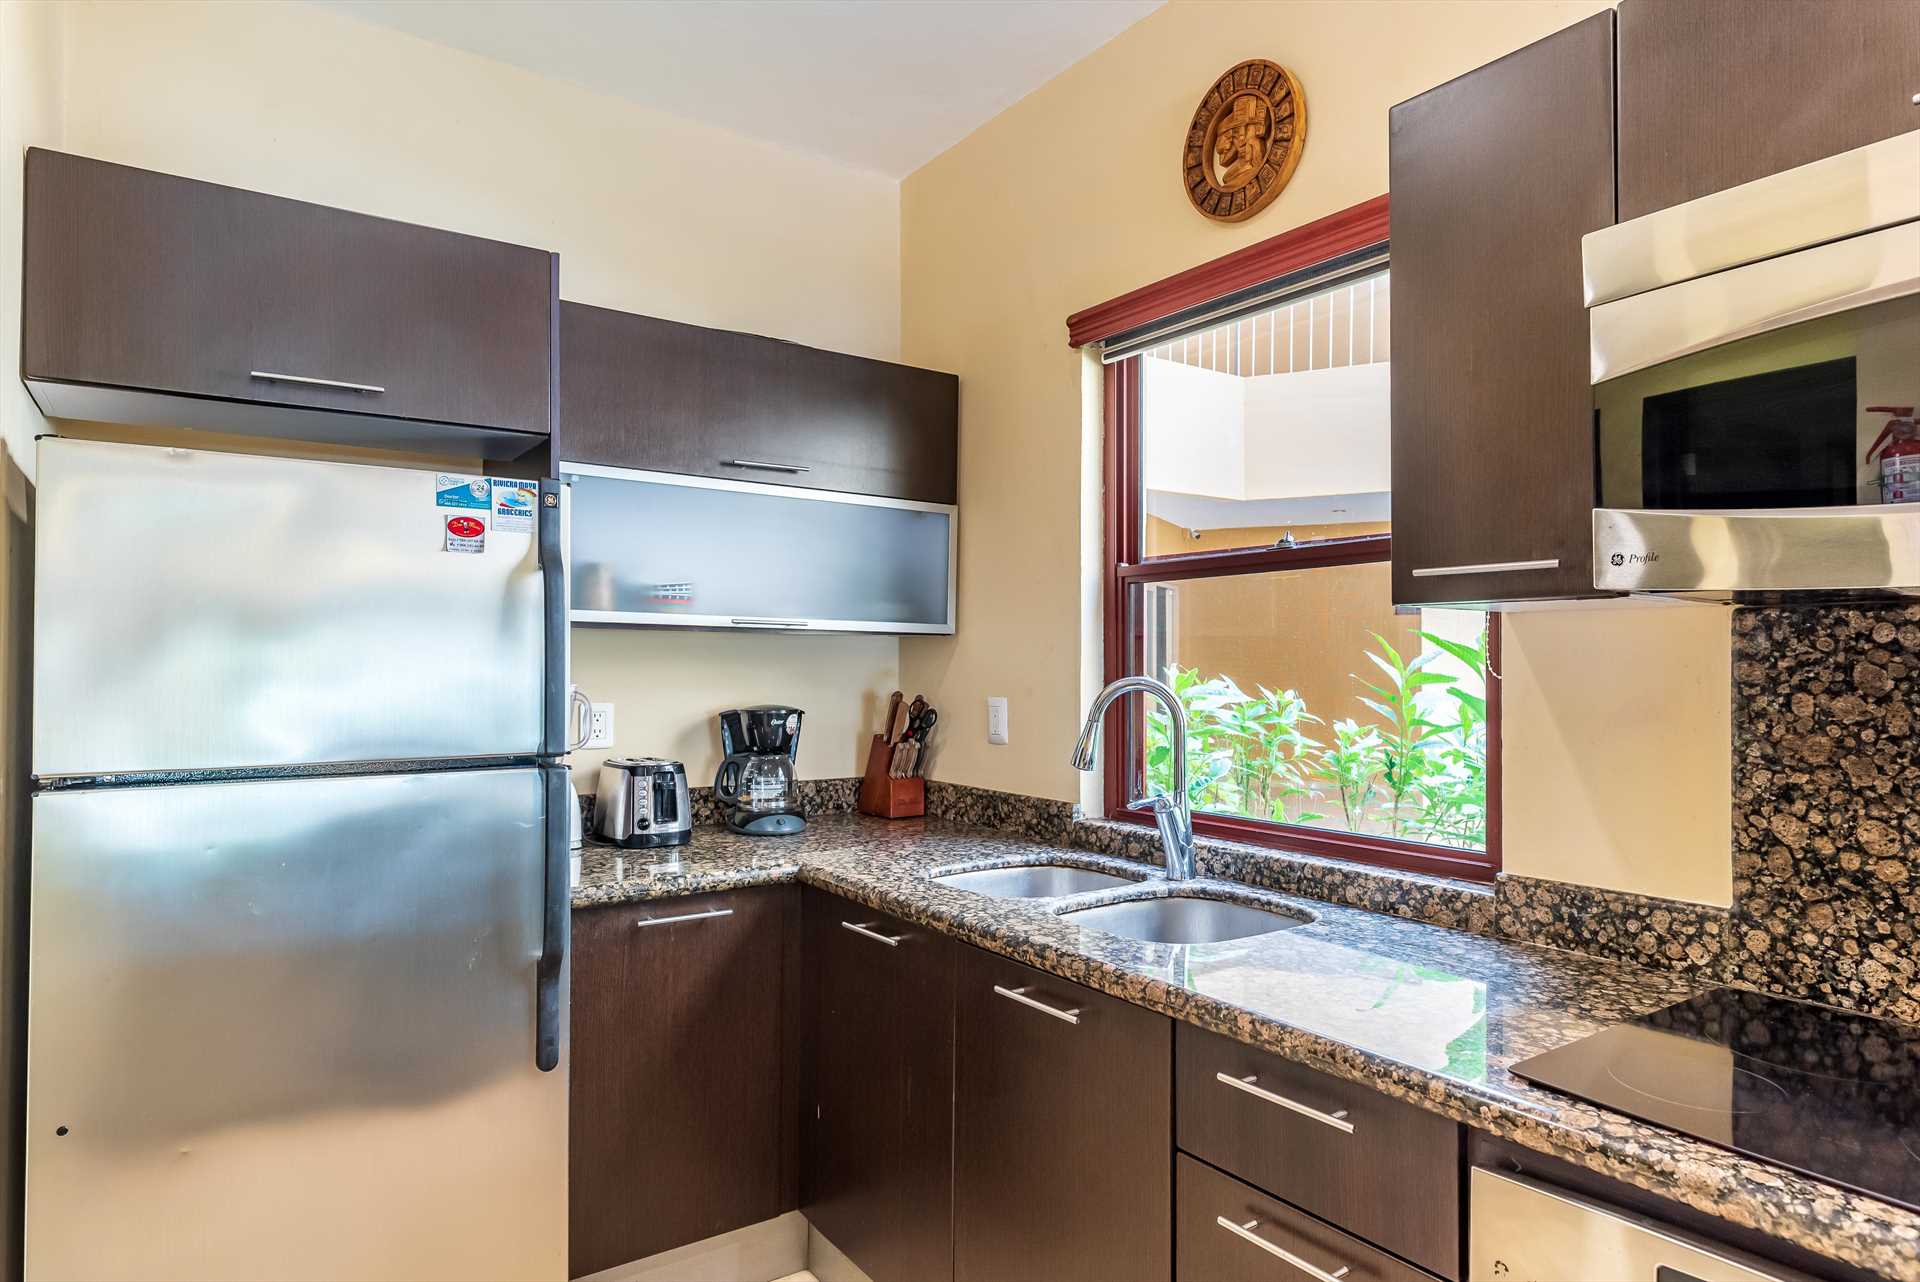 Stainless steel appliances + fully stocked